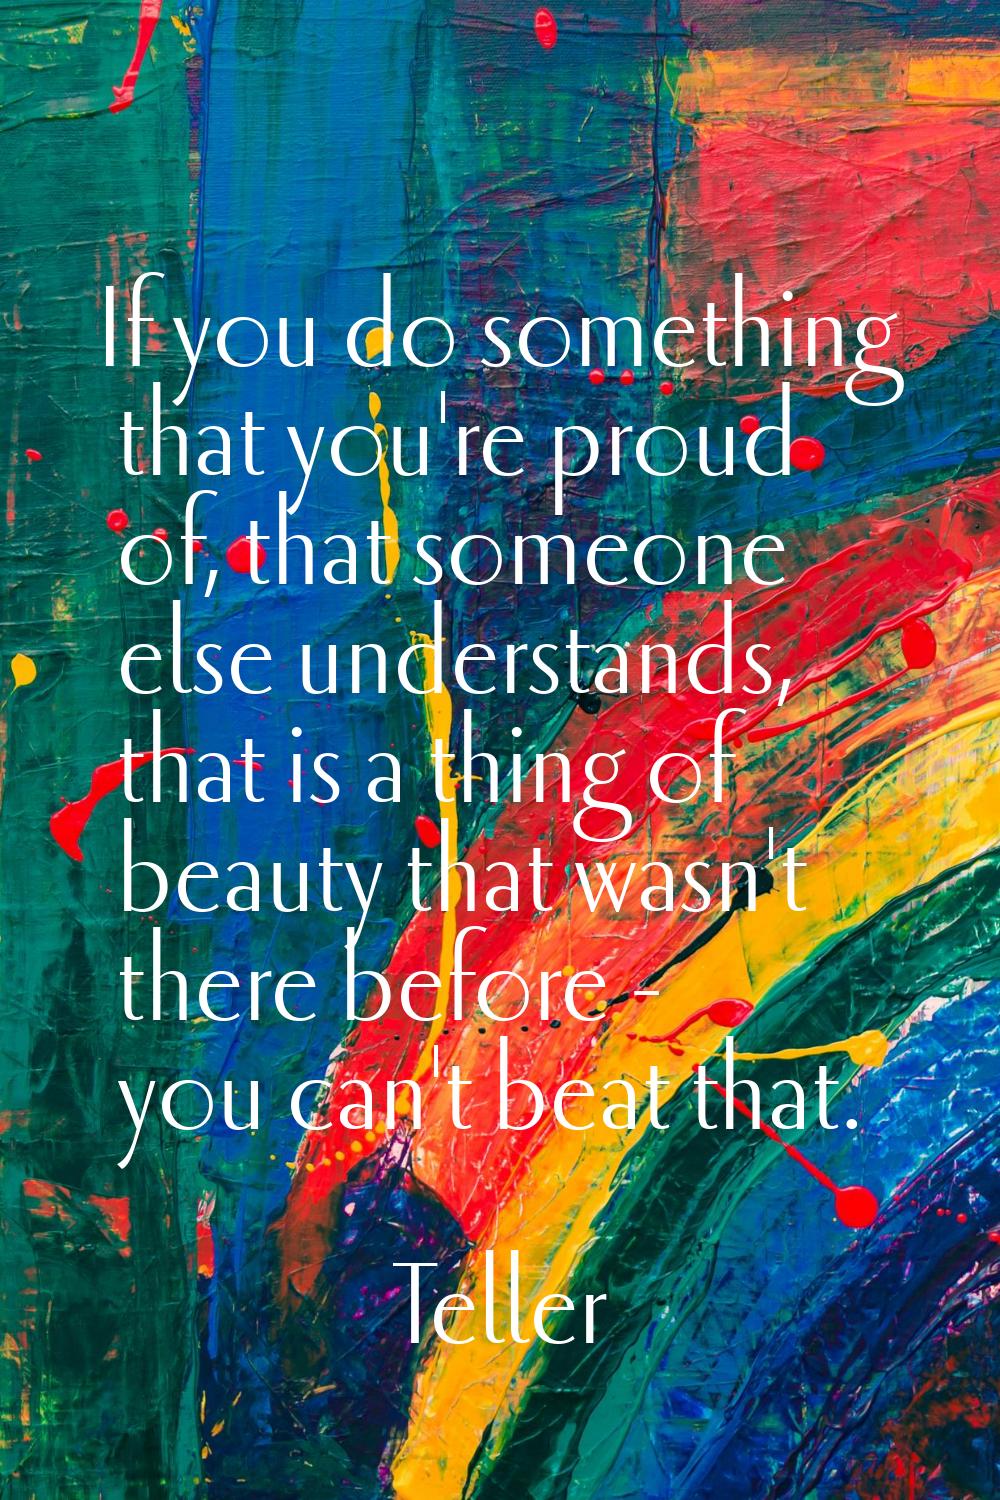 If you do something that you're proud of, that someone else understands, that is a thing of beauty 